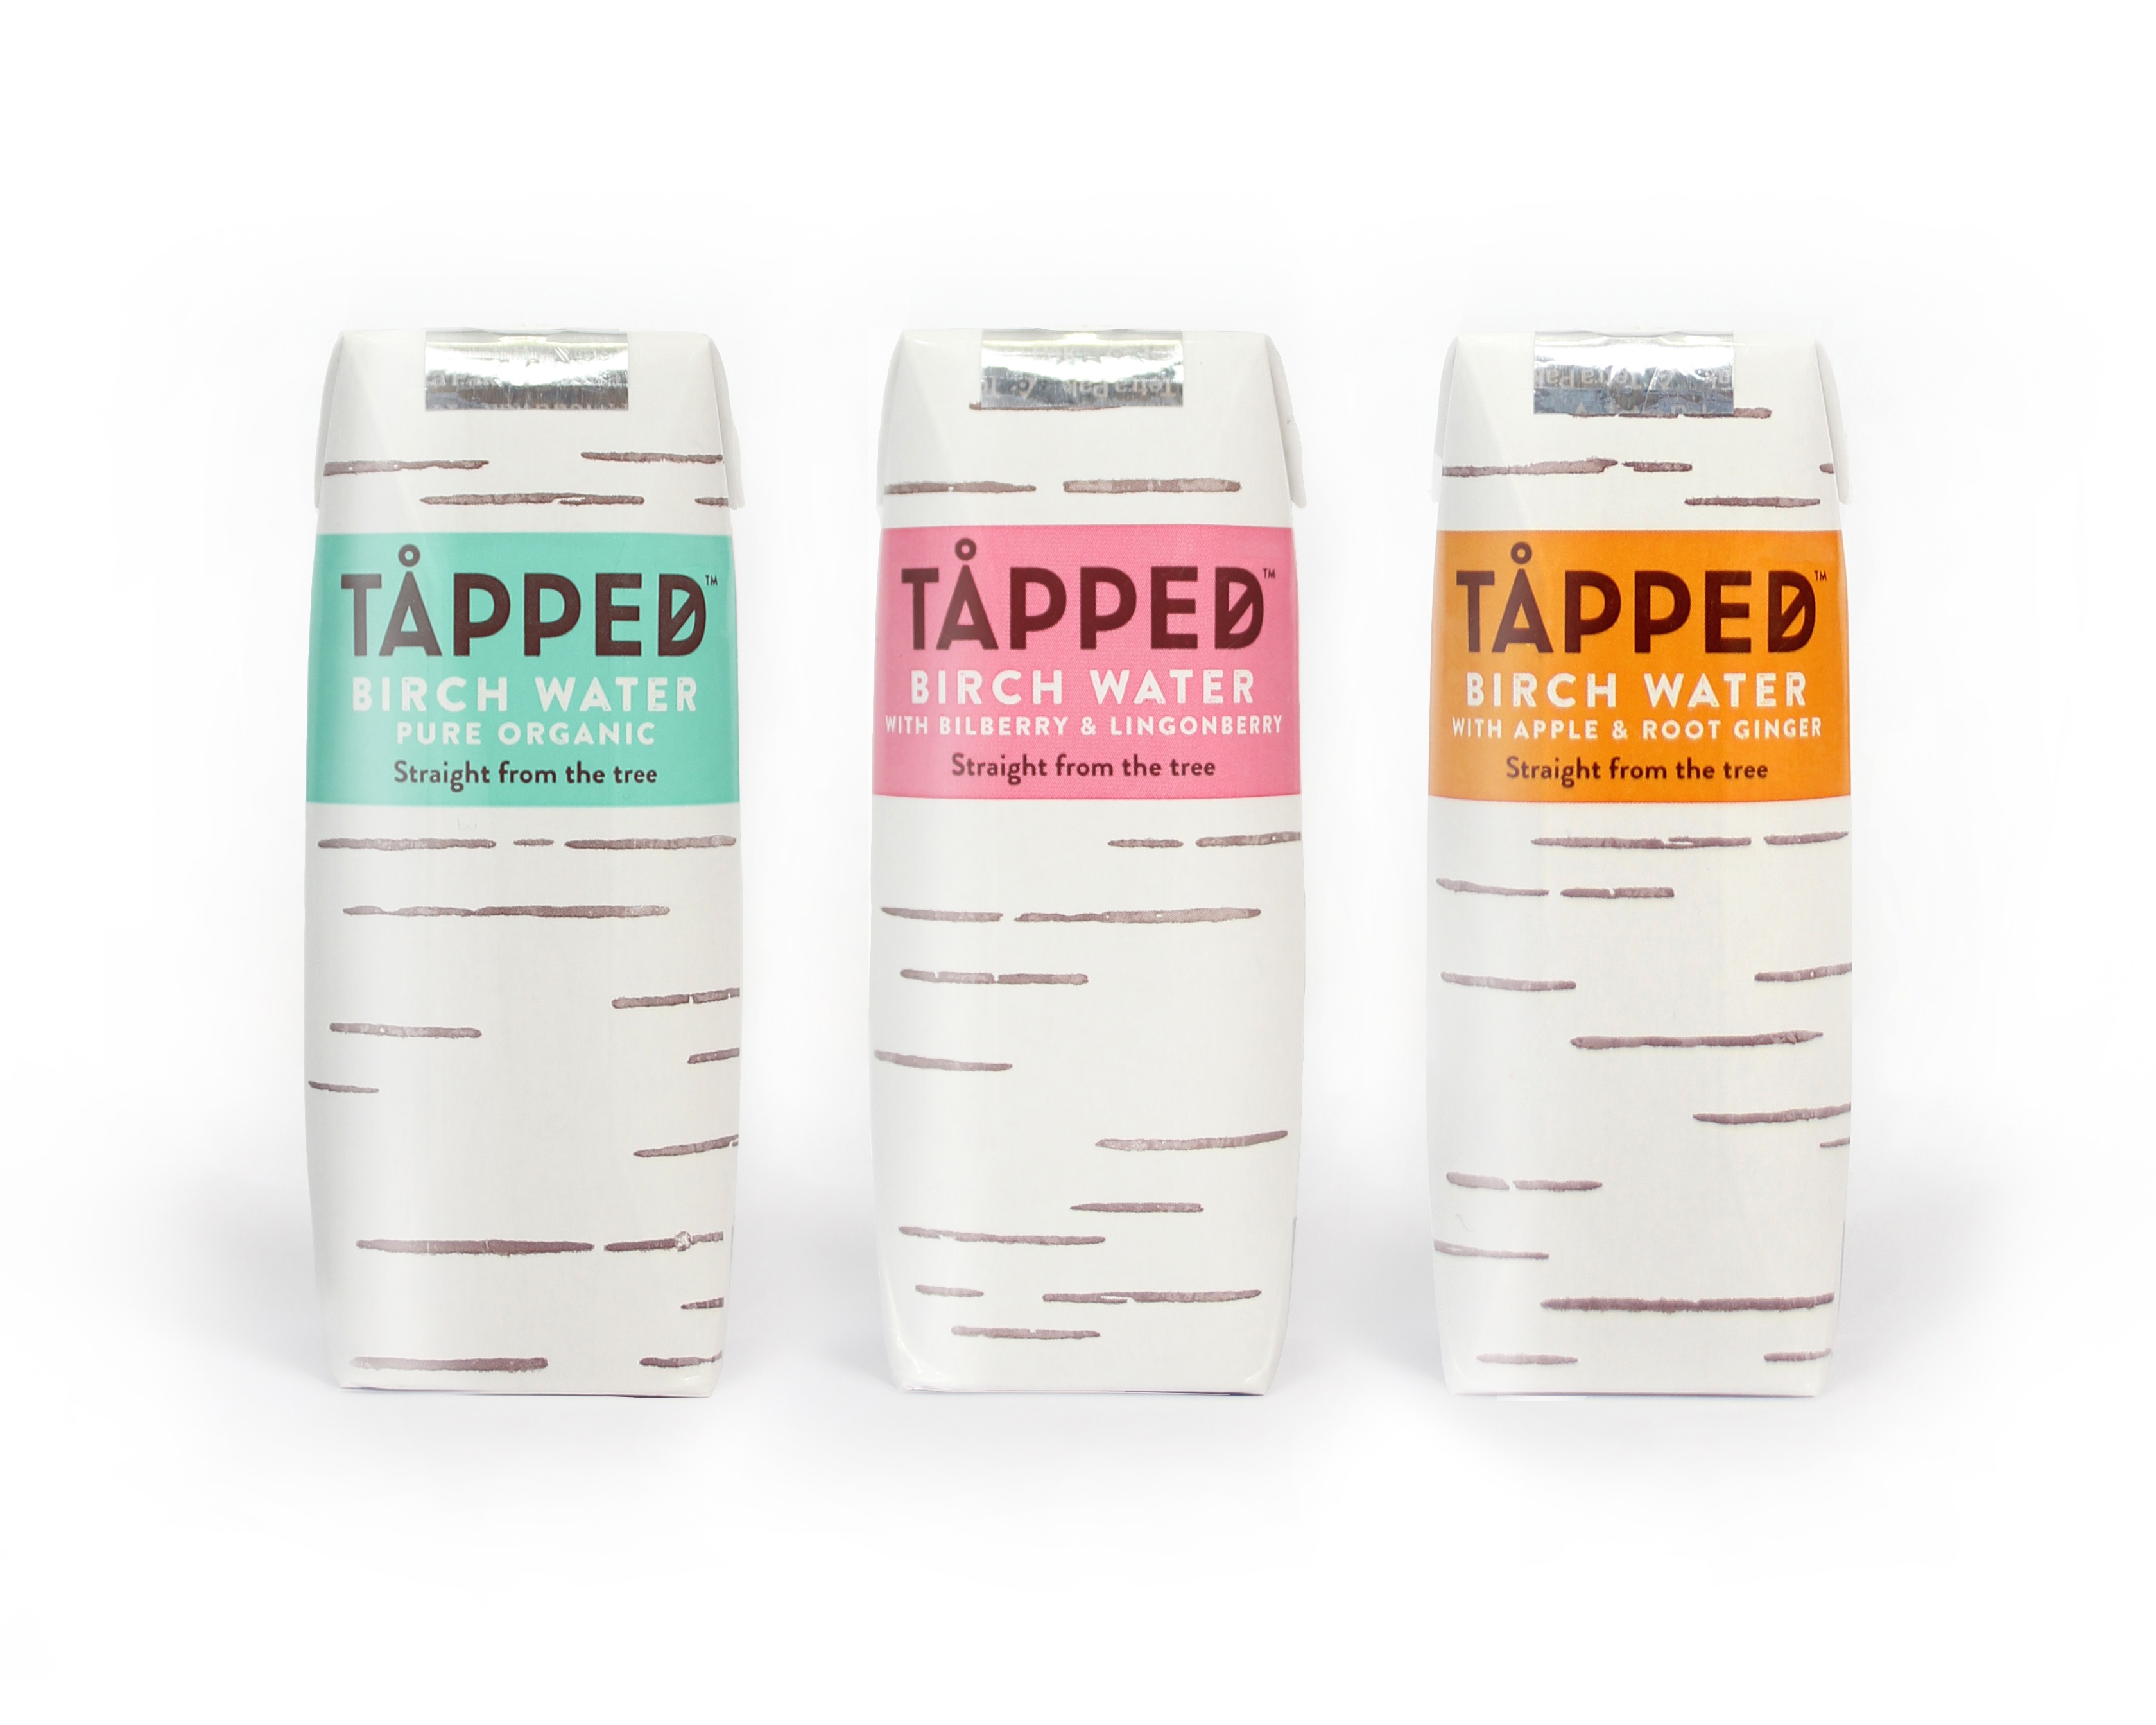 Nutrition, naturalness and NPD: How TAPPED's founder plans to grow the birch  water category